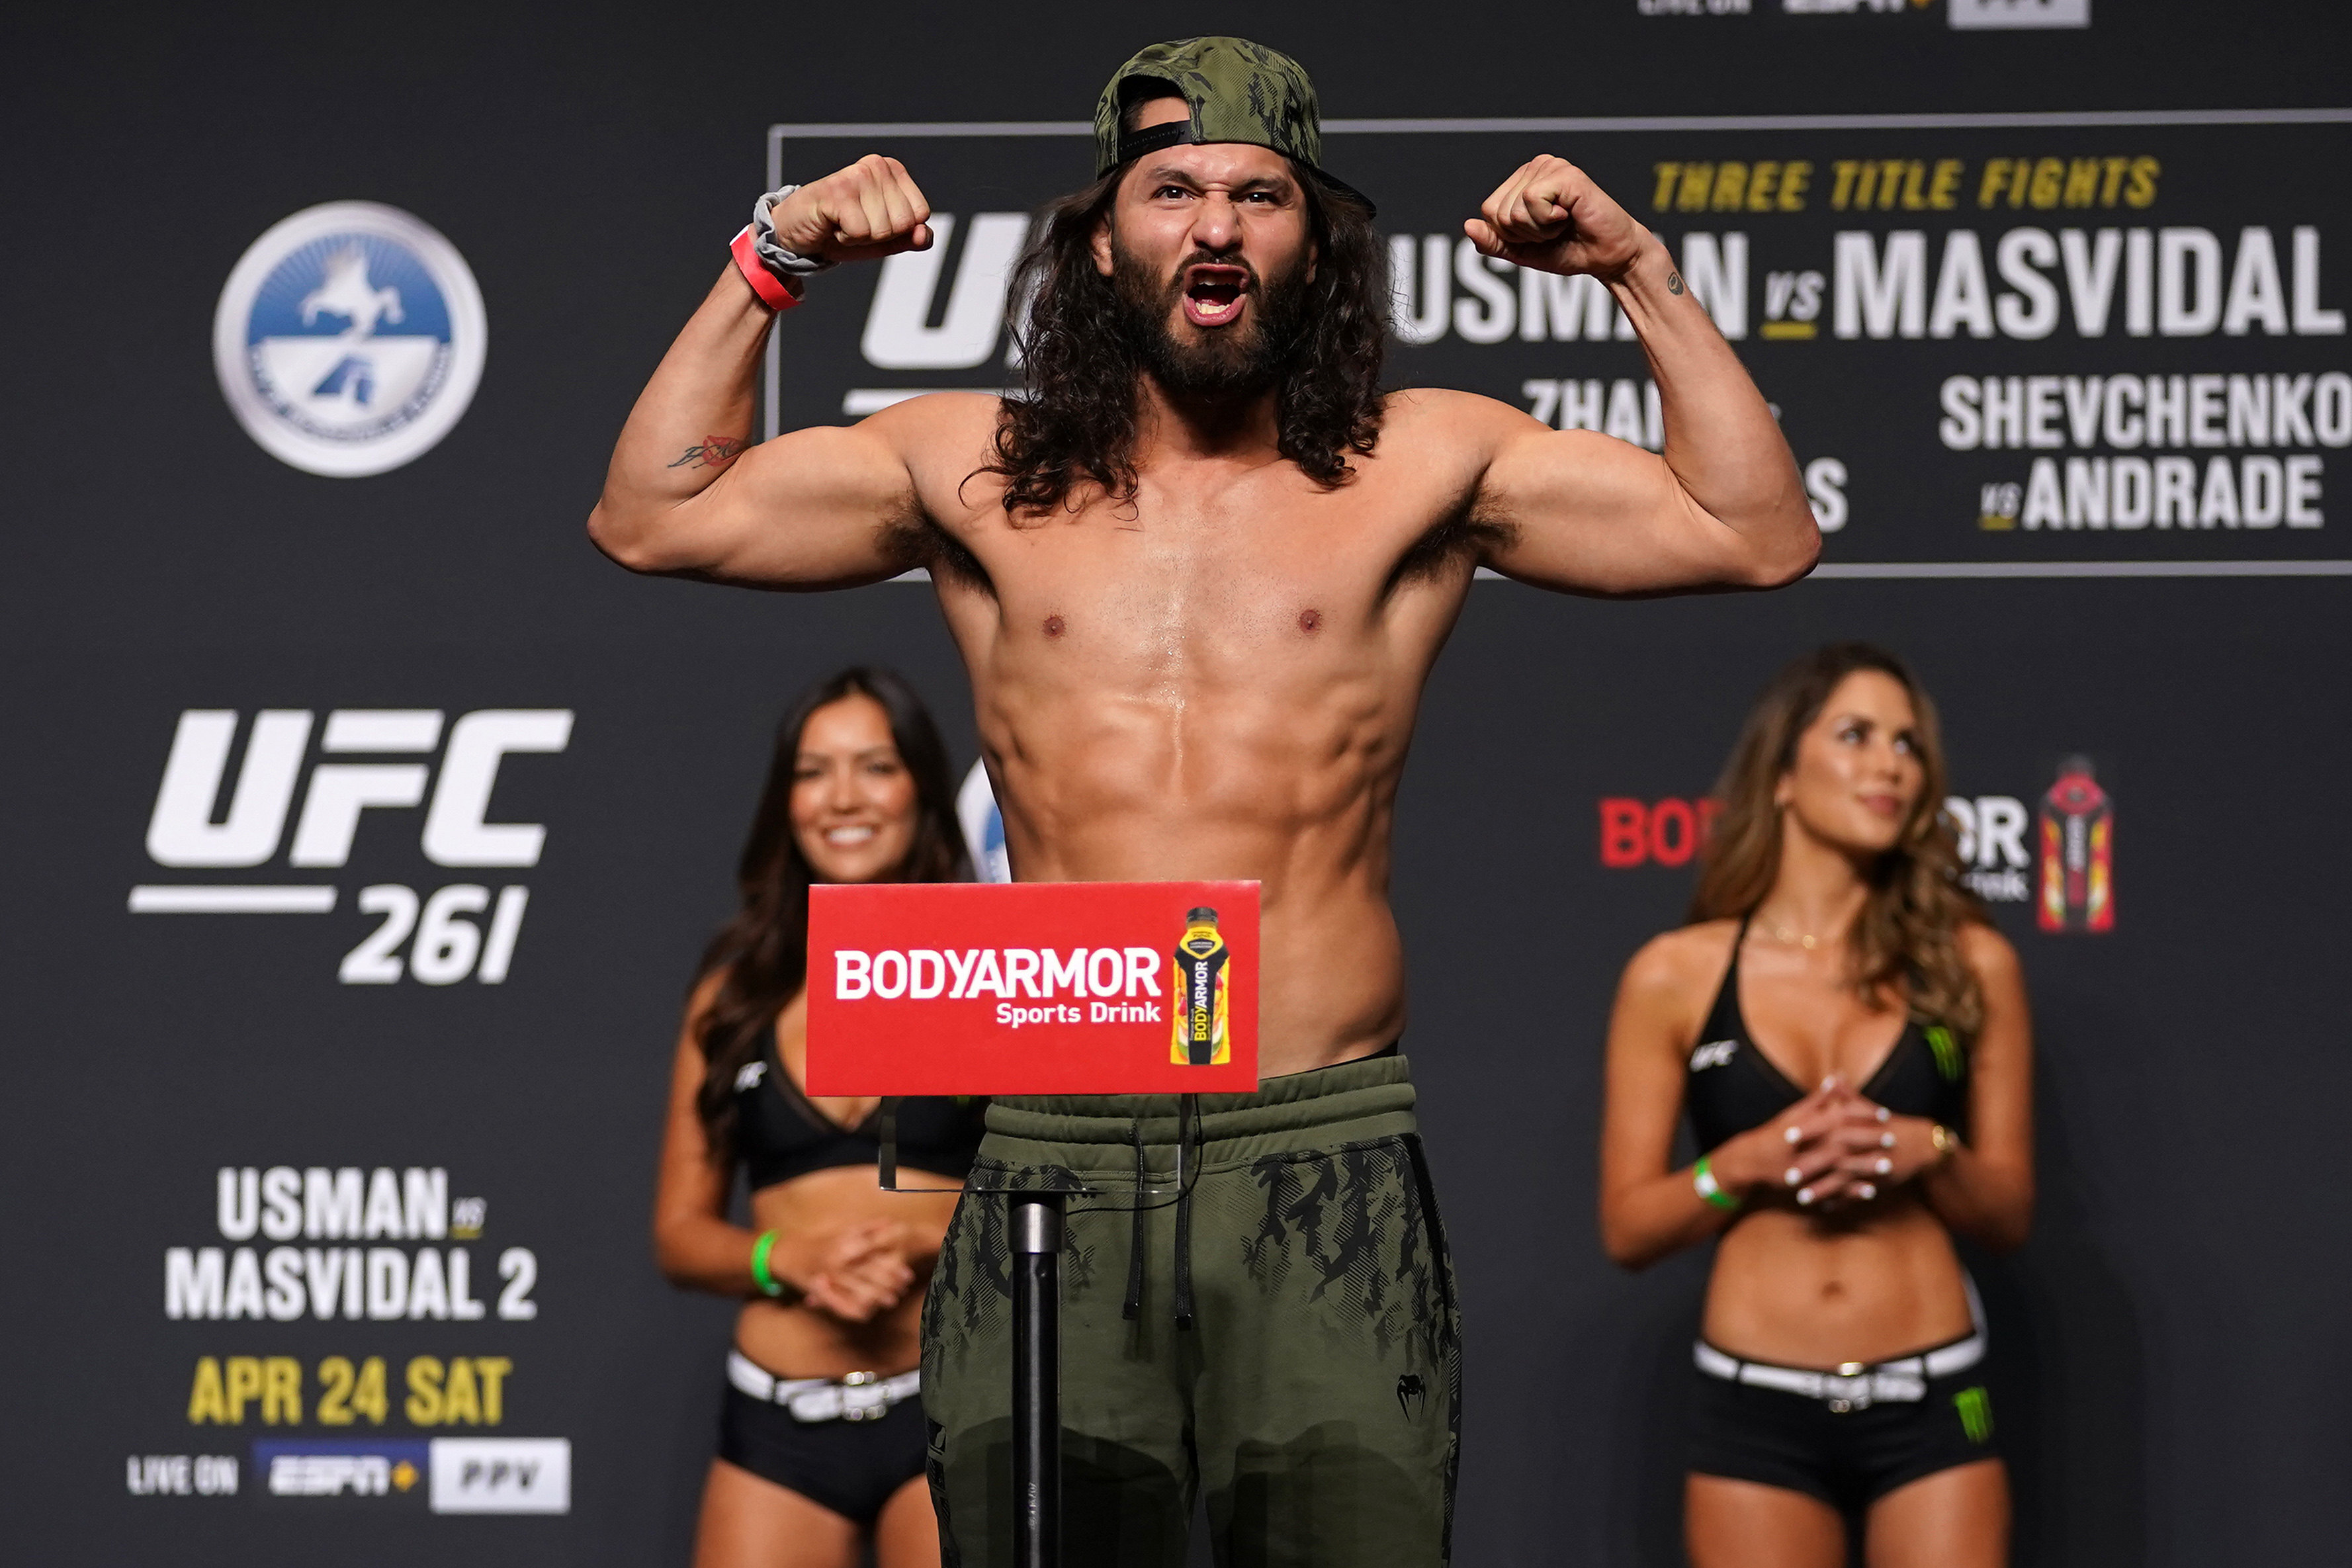 Jorge Masvidal poses at the weigh-ins for a fight with Kamaru Usman. Photo: Jasen Vinlove-USA TODAY Sports